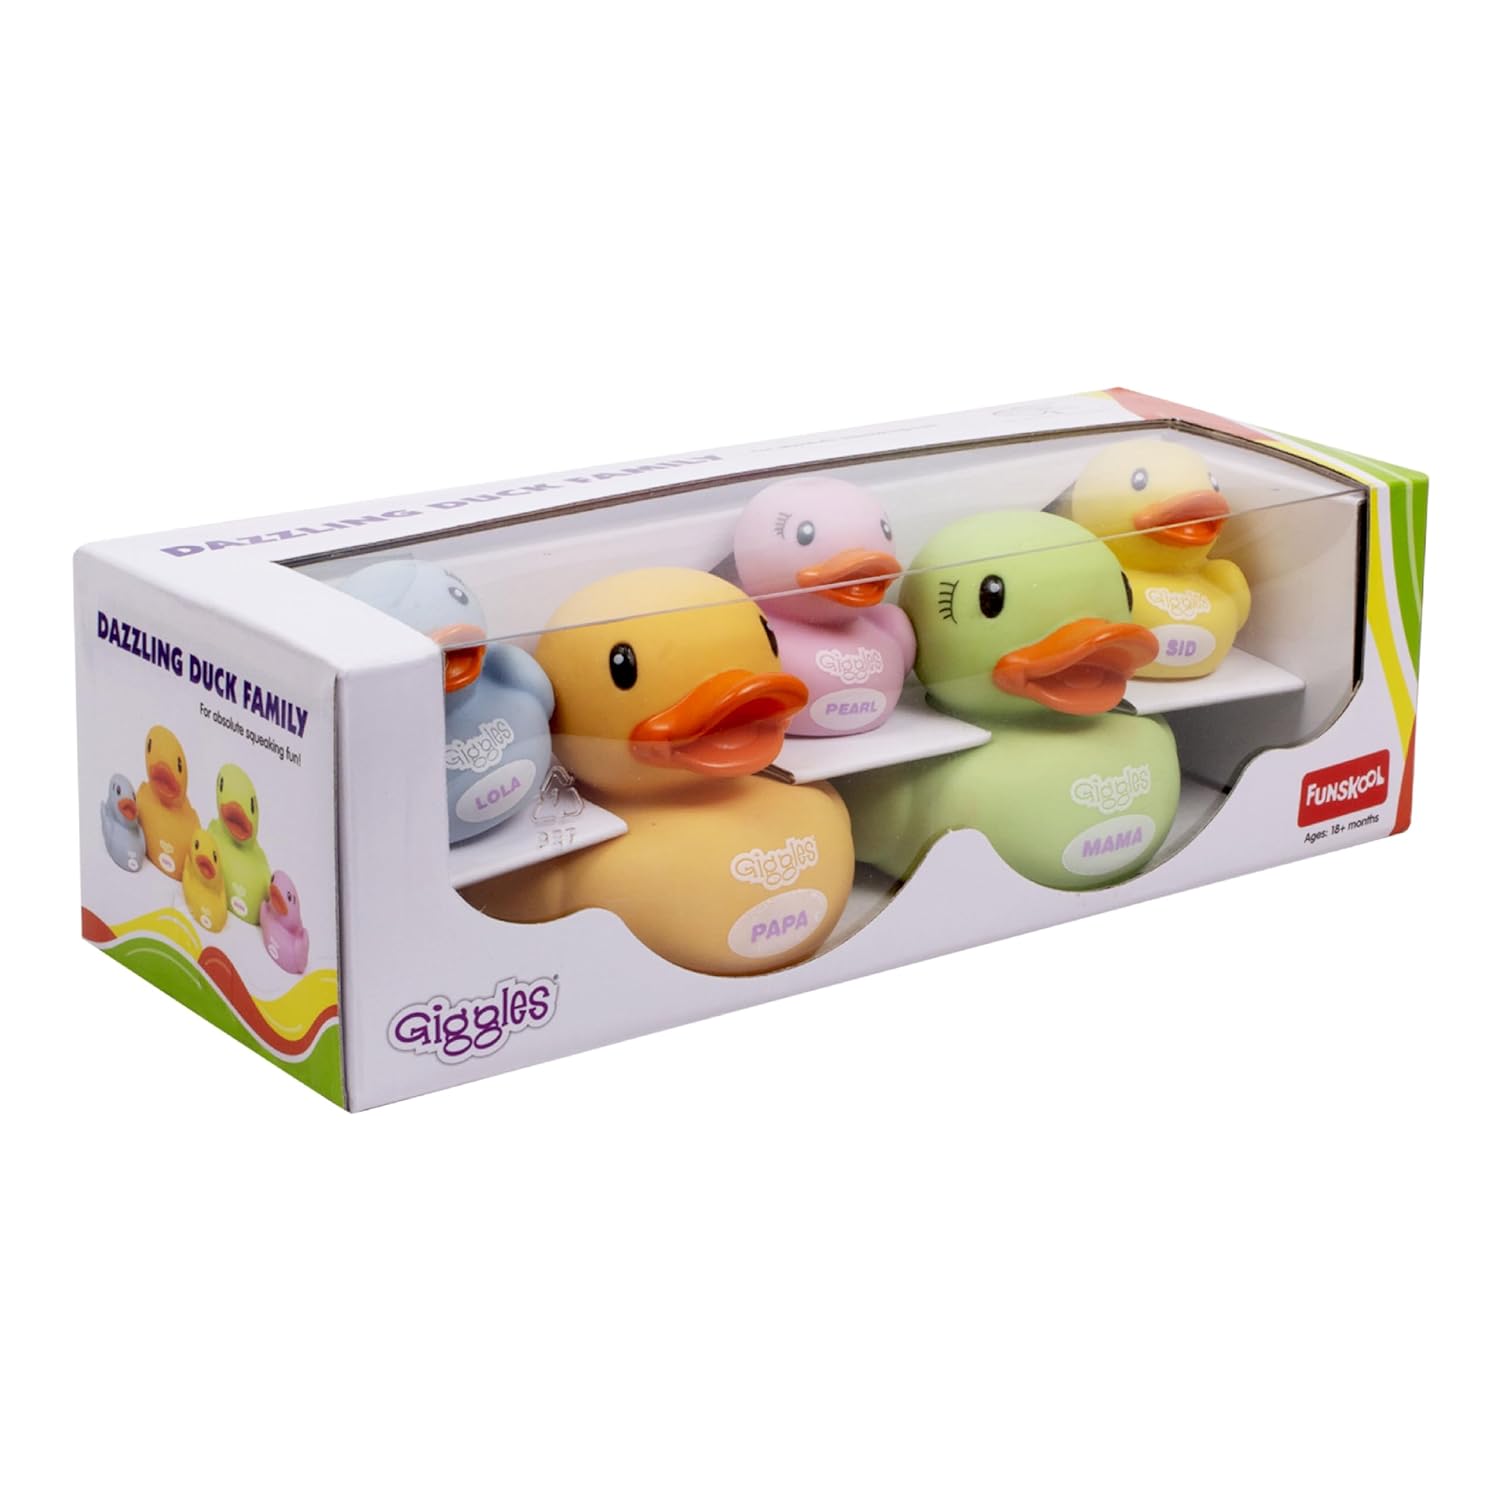 Funskool Giggles Dazzling Duck Family Squeakers , Multicolor Duck Squeakers Pack of 5 for Infant & Toddlers